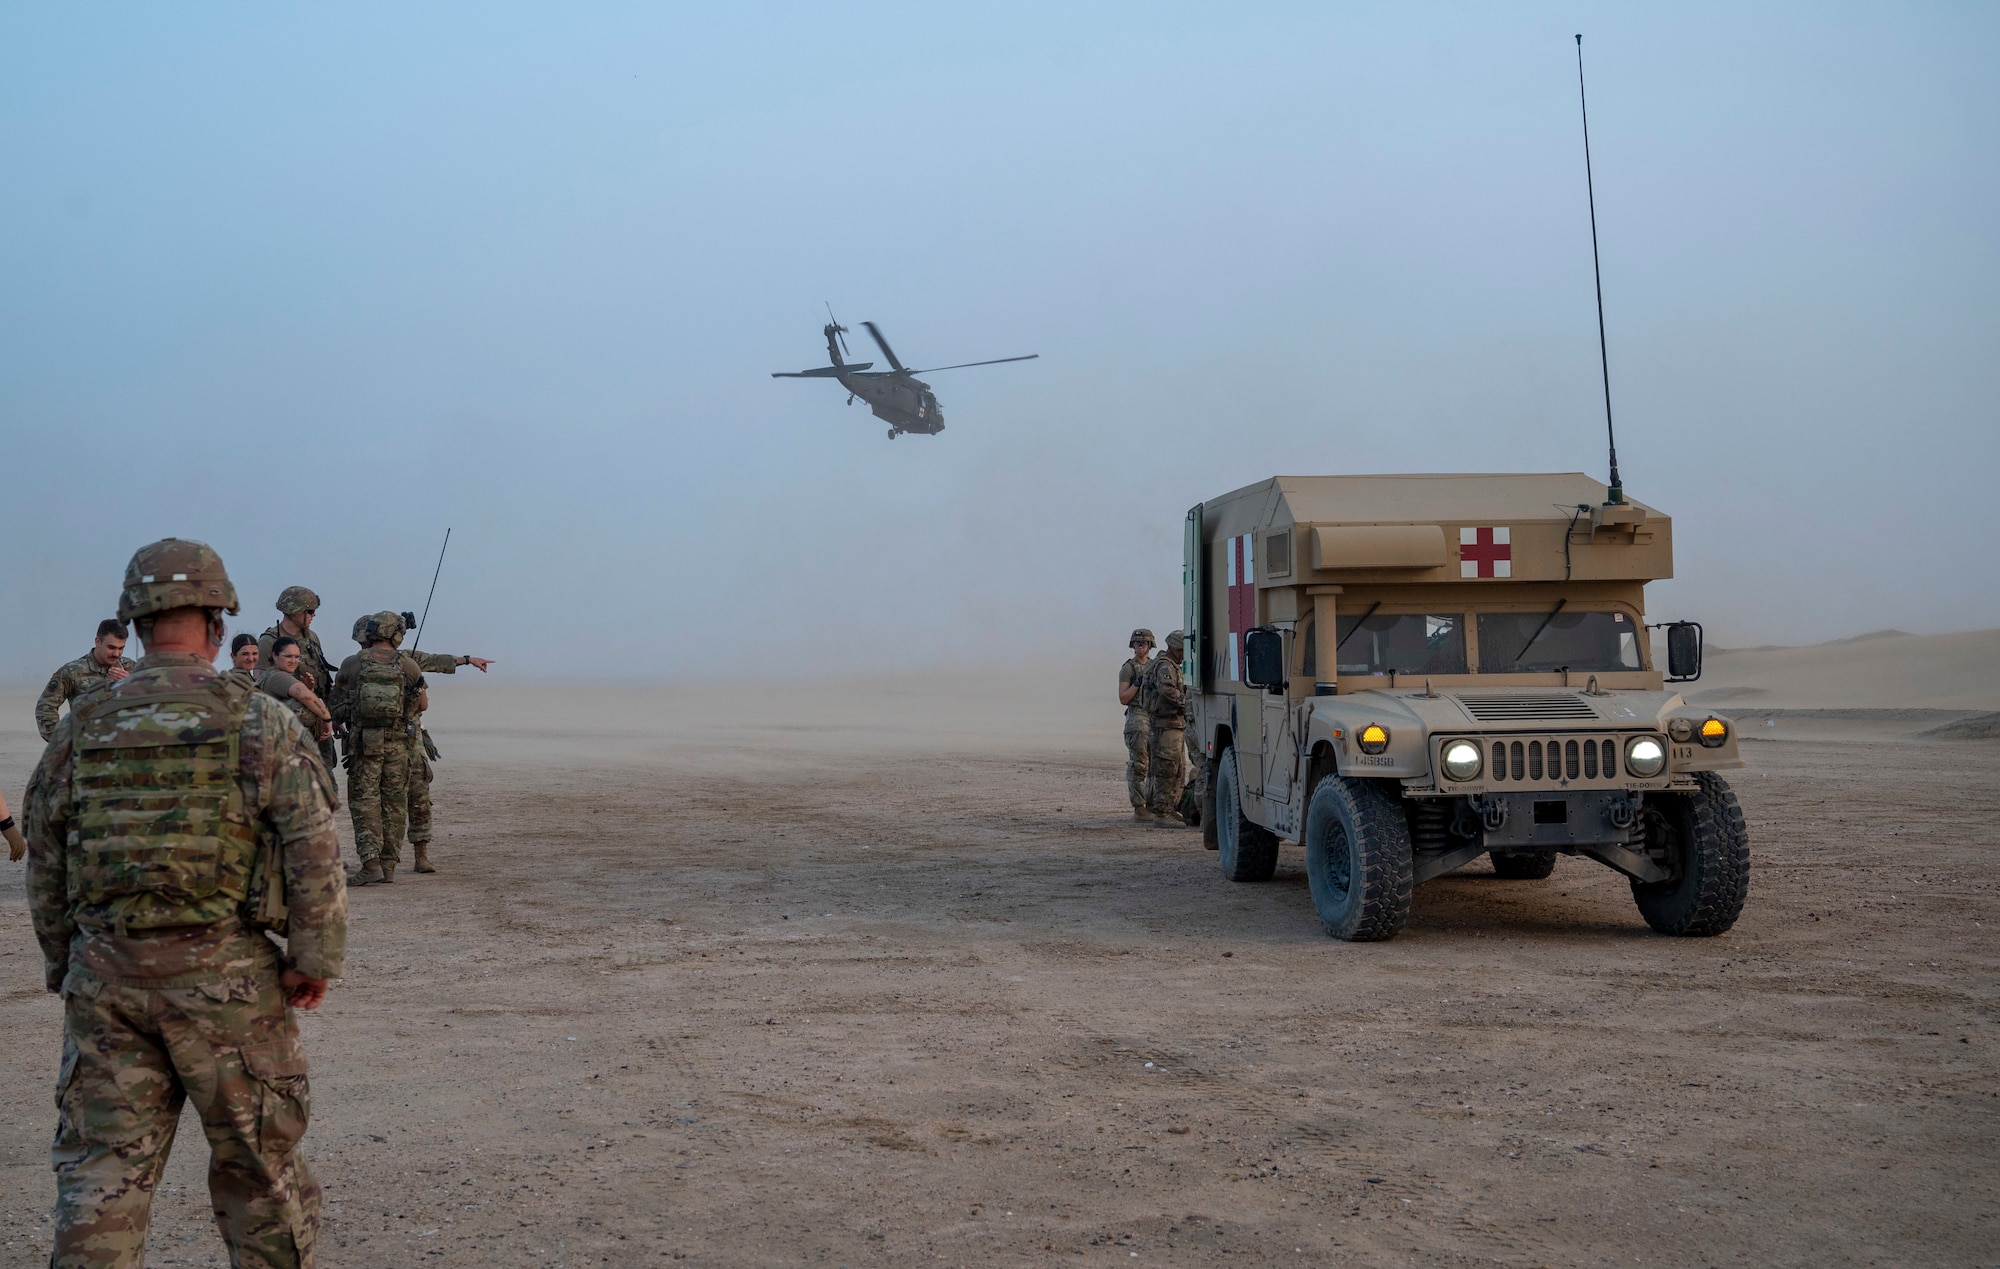 U.S. Army Soldiers watch as a UH-60 Blackhawk Helicopter takes off at Udairi Range, Kuwait, March 14, 2023.